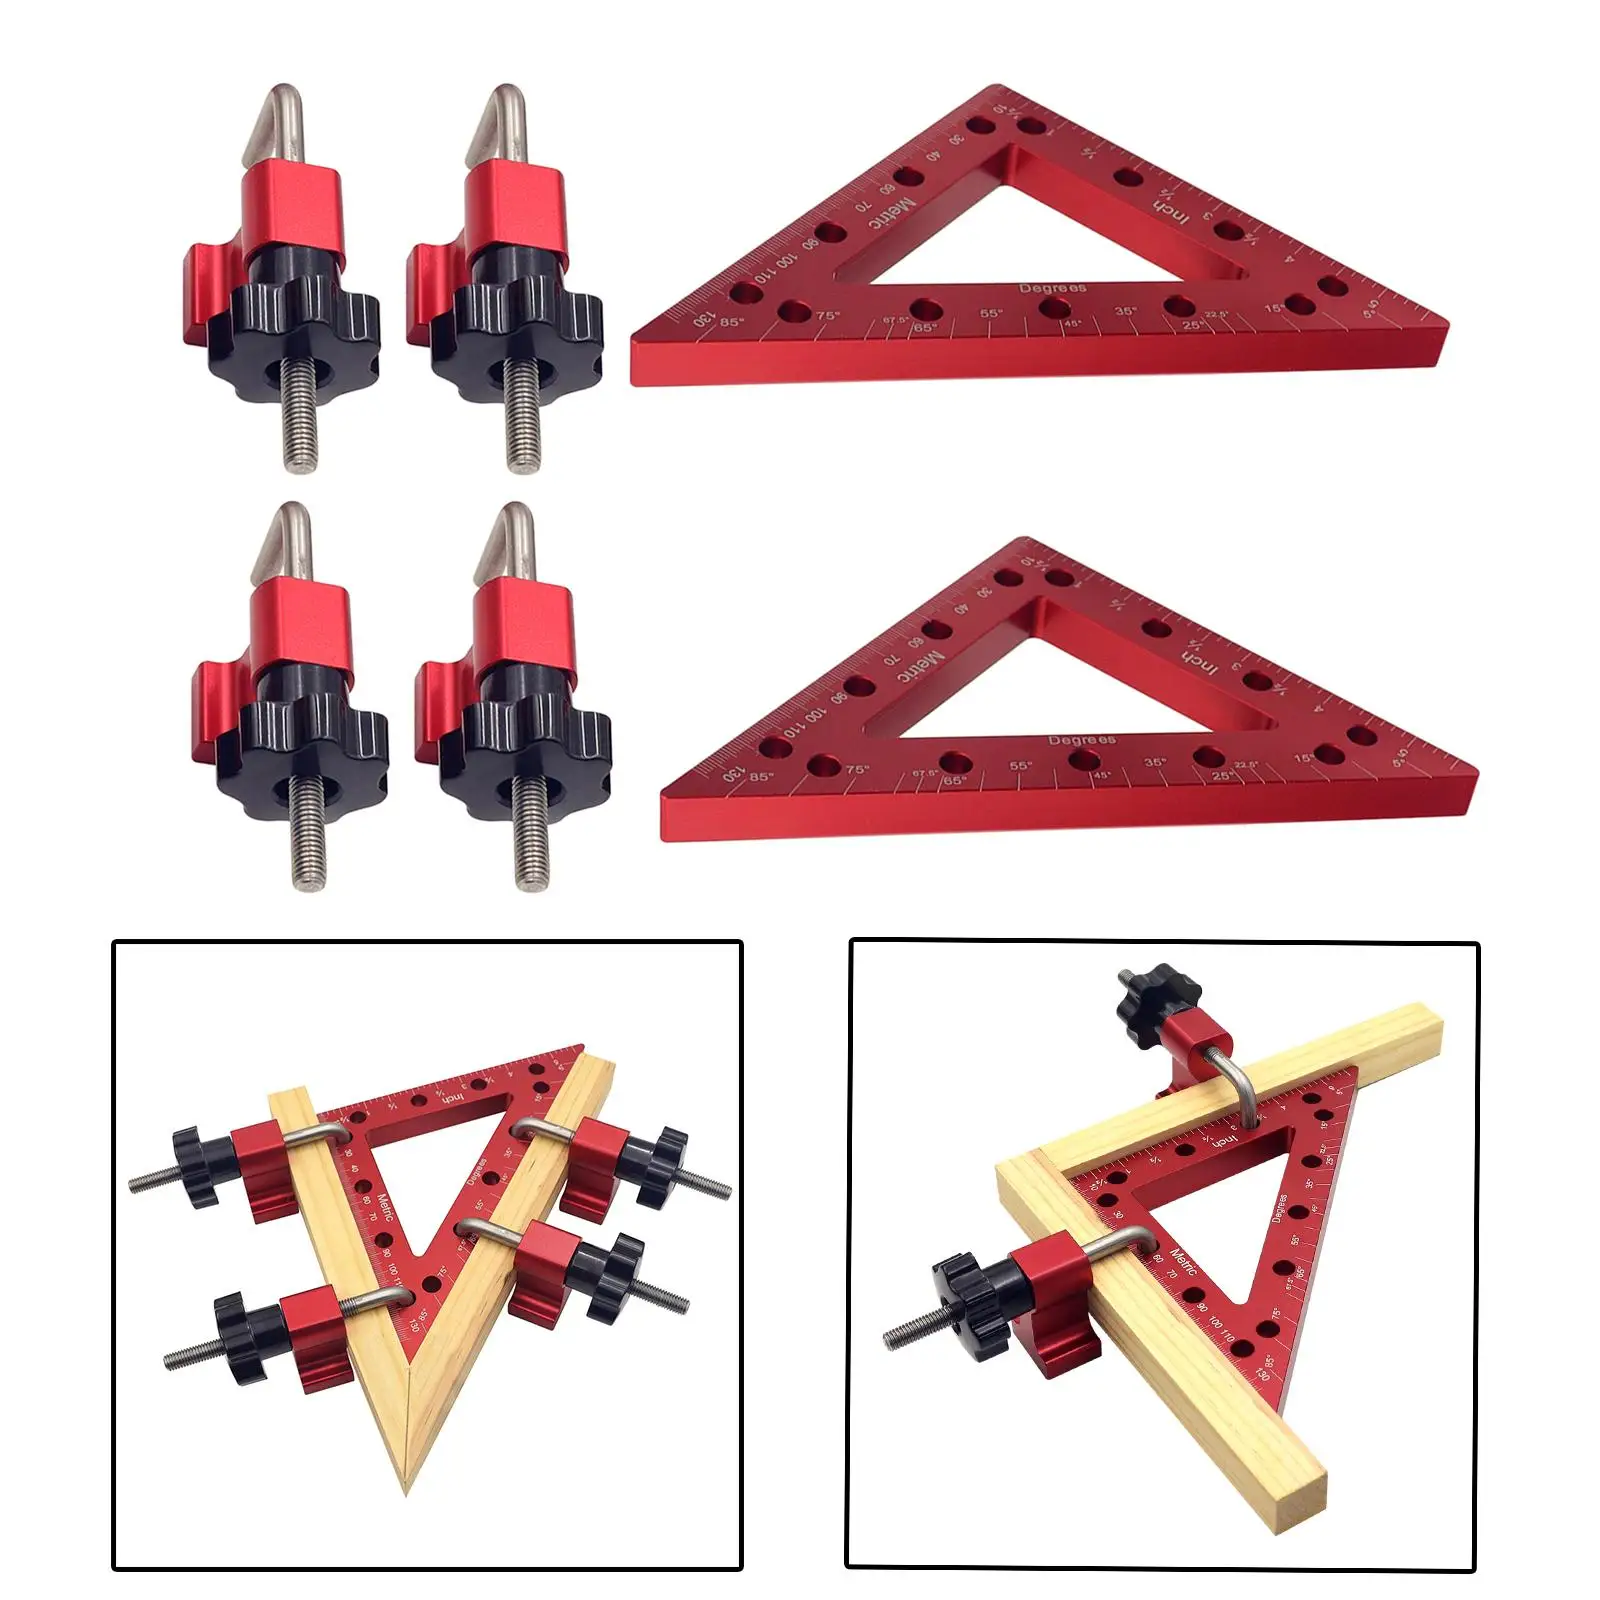 2x Aluminum Alloy Right Angle Clamps 90 Degree Positioning Squares Woodworking Corner Clamp Clamping Tool for Picture Frame Box